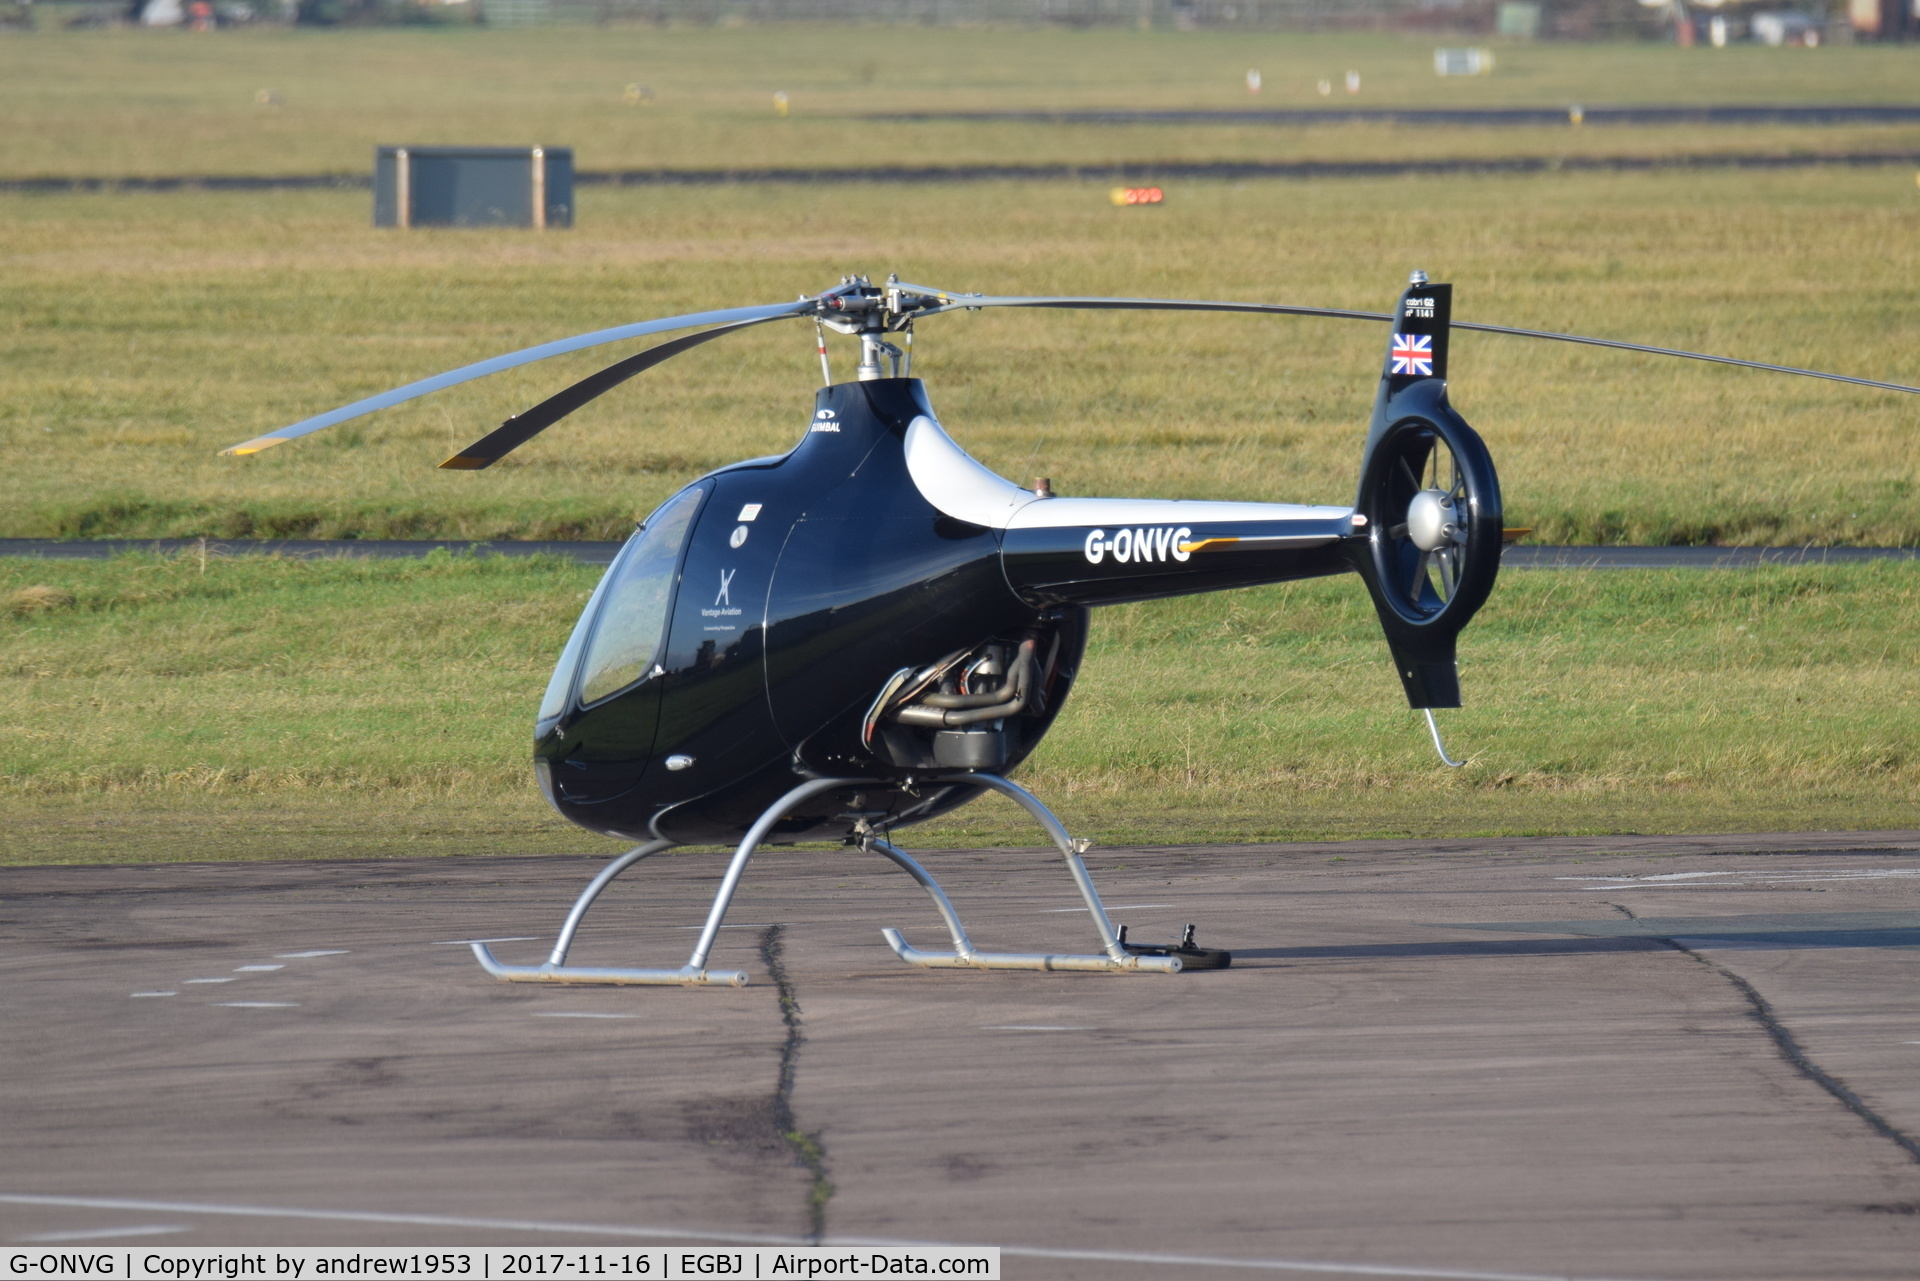 G-ONVG, 2016 Guimbal Cabri G2 C/N 1141, G-ONVG at Gloucestershire Airport.